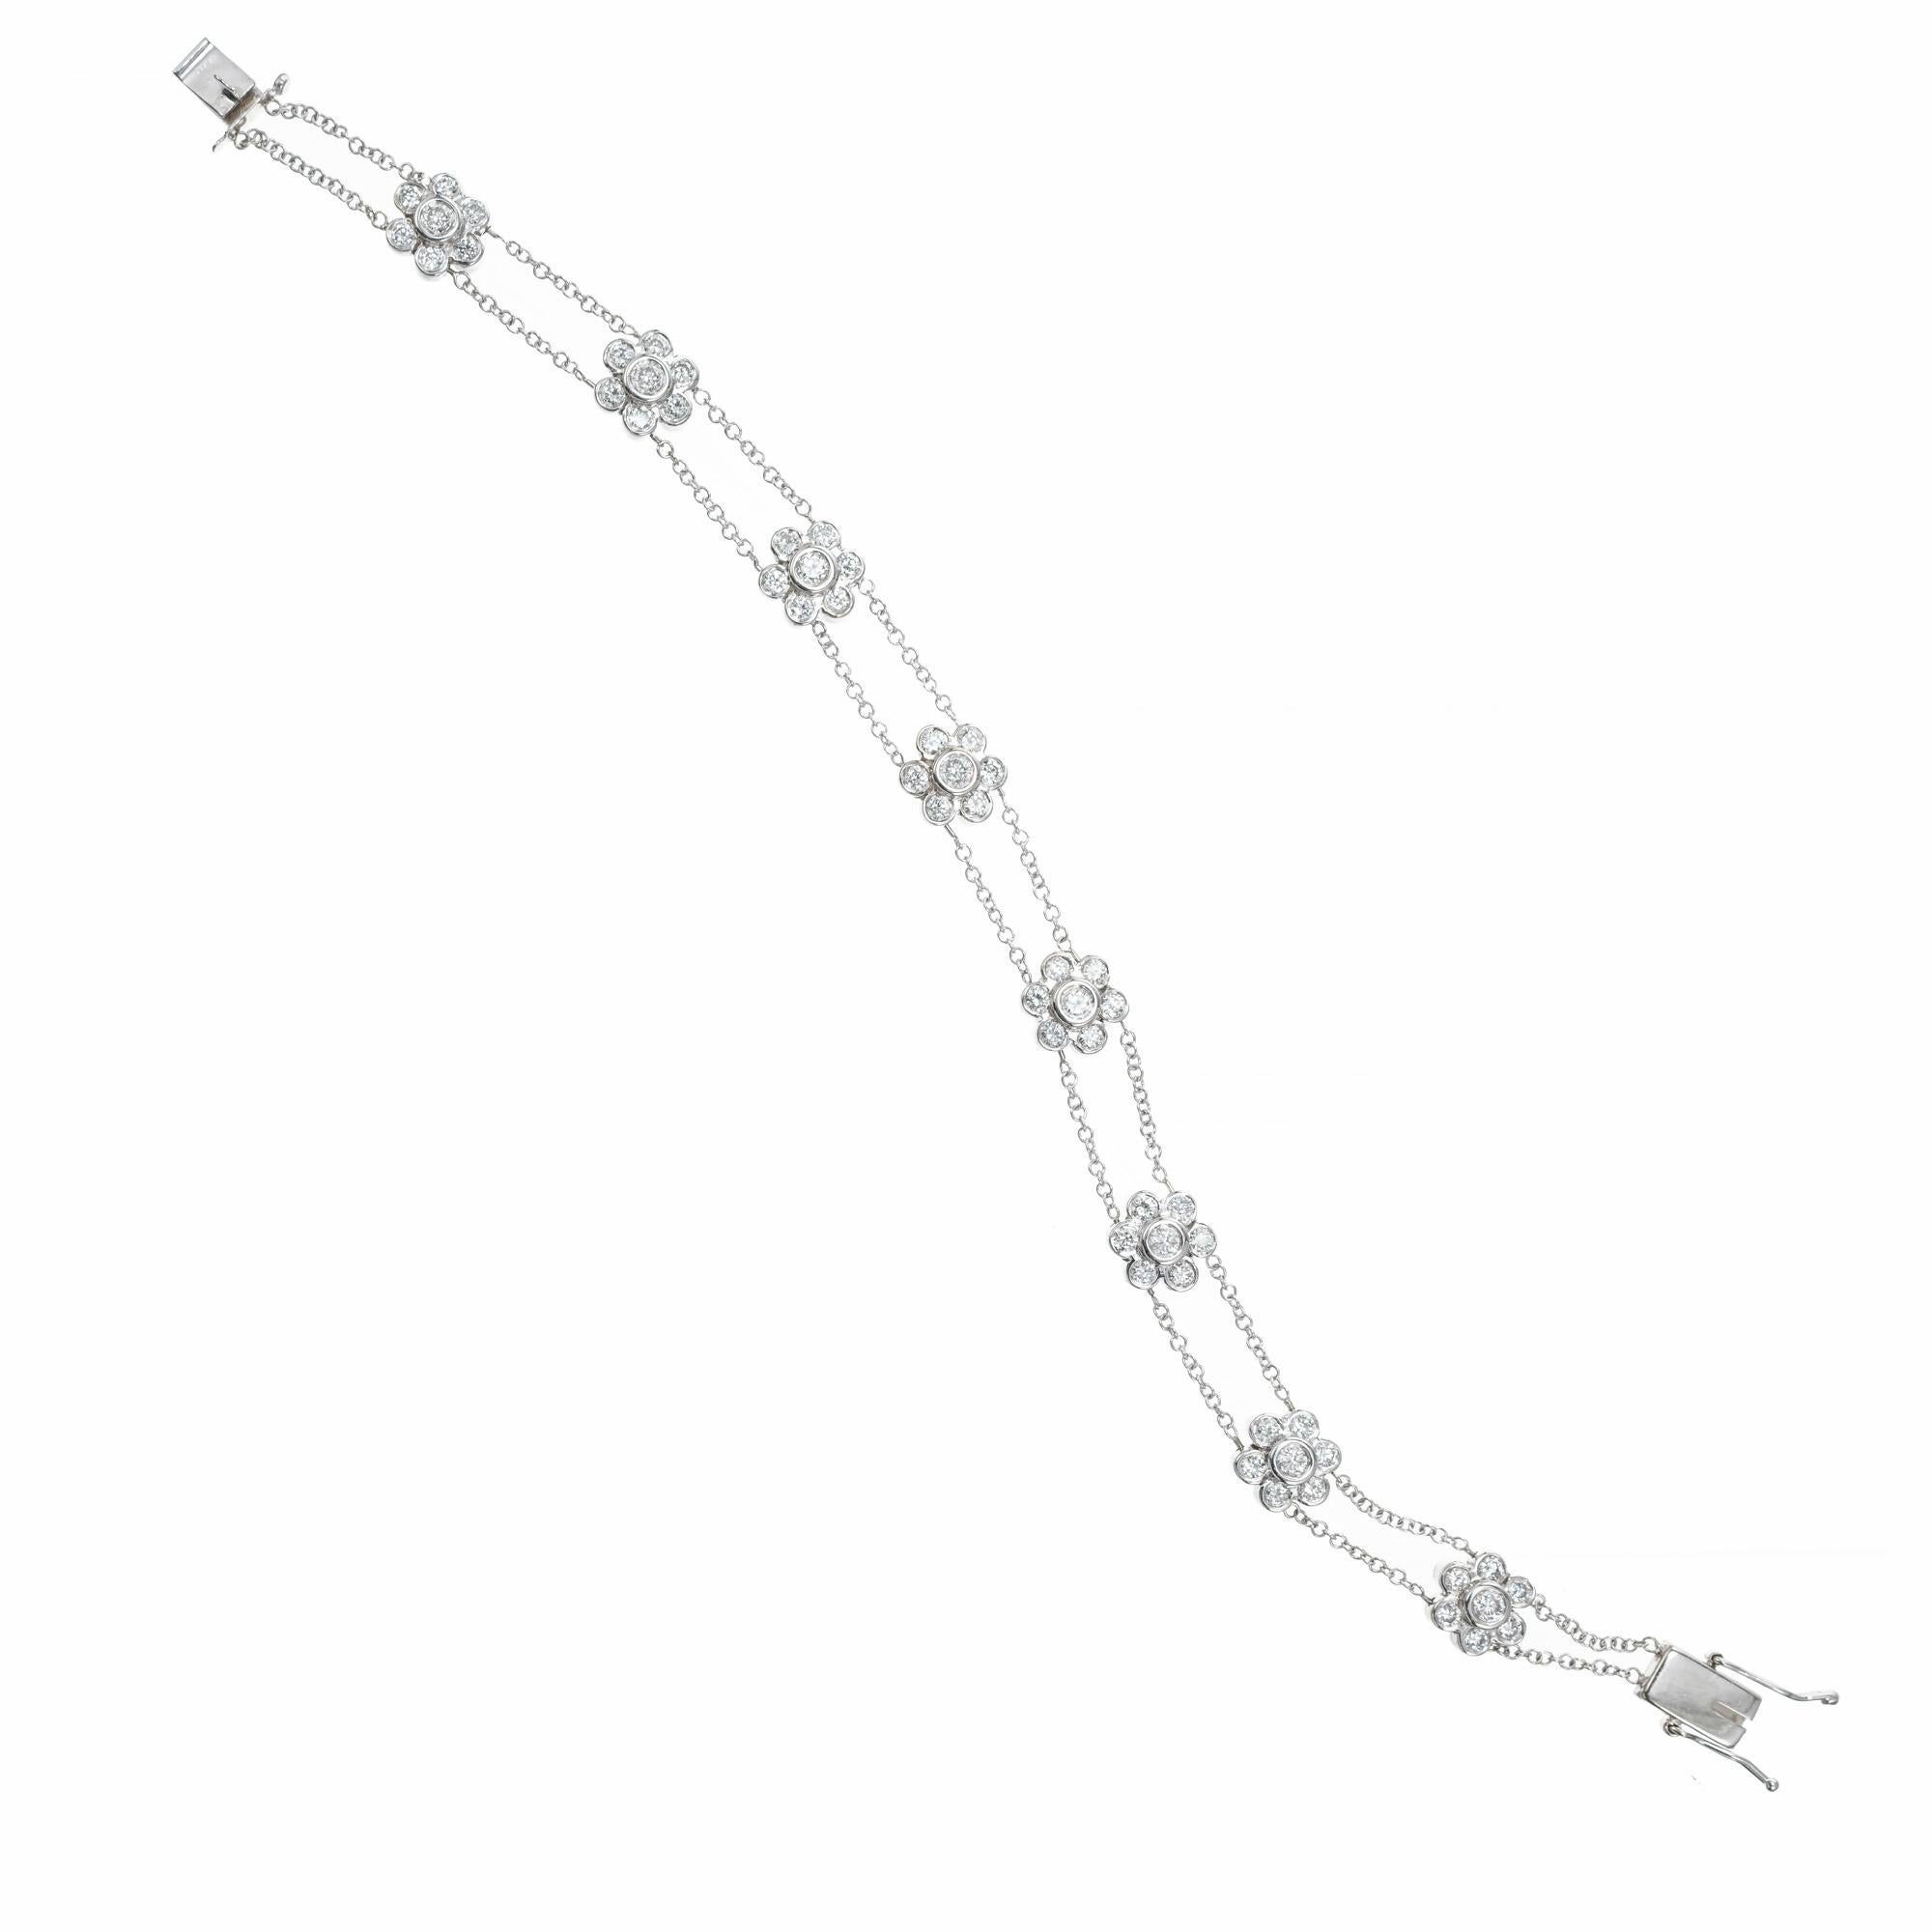 Double chain 8 station diamond flower cluster bracelet. 56 round bezel set diamonds in 8 flower settings connected by a double chain bracelet. Box catch with two safety's. 7 inches long.

56 round diamonds, H-I VS SI approx. 1.00cts
14k white gold